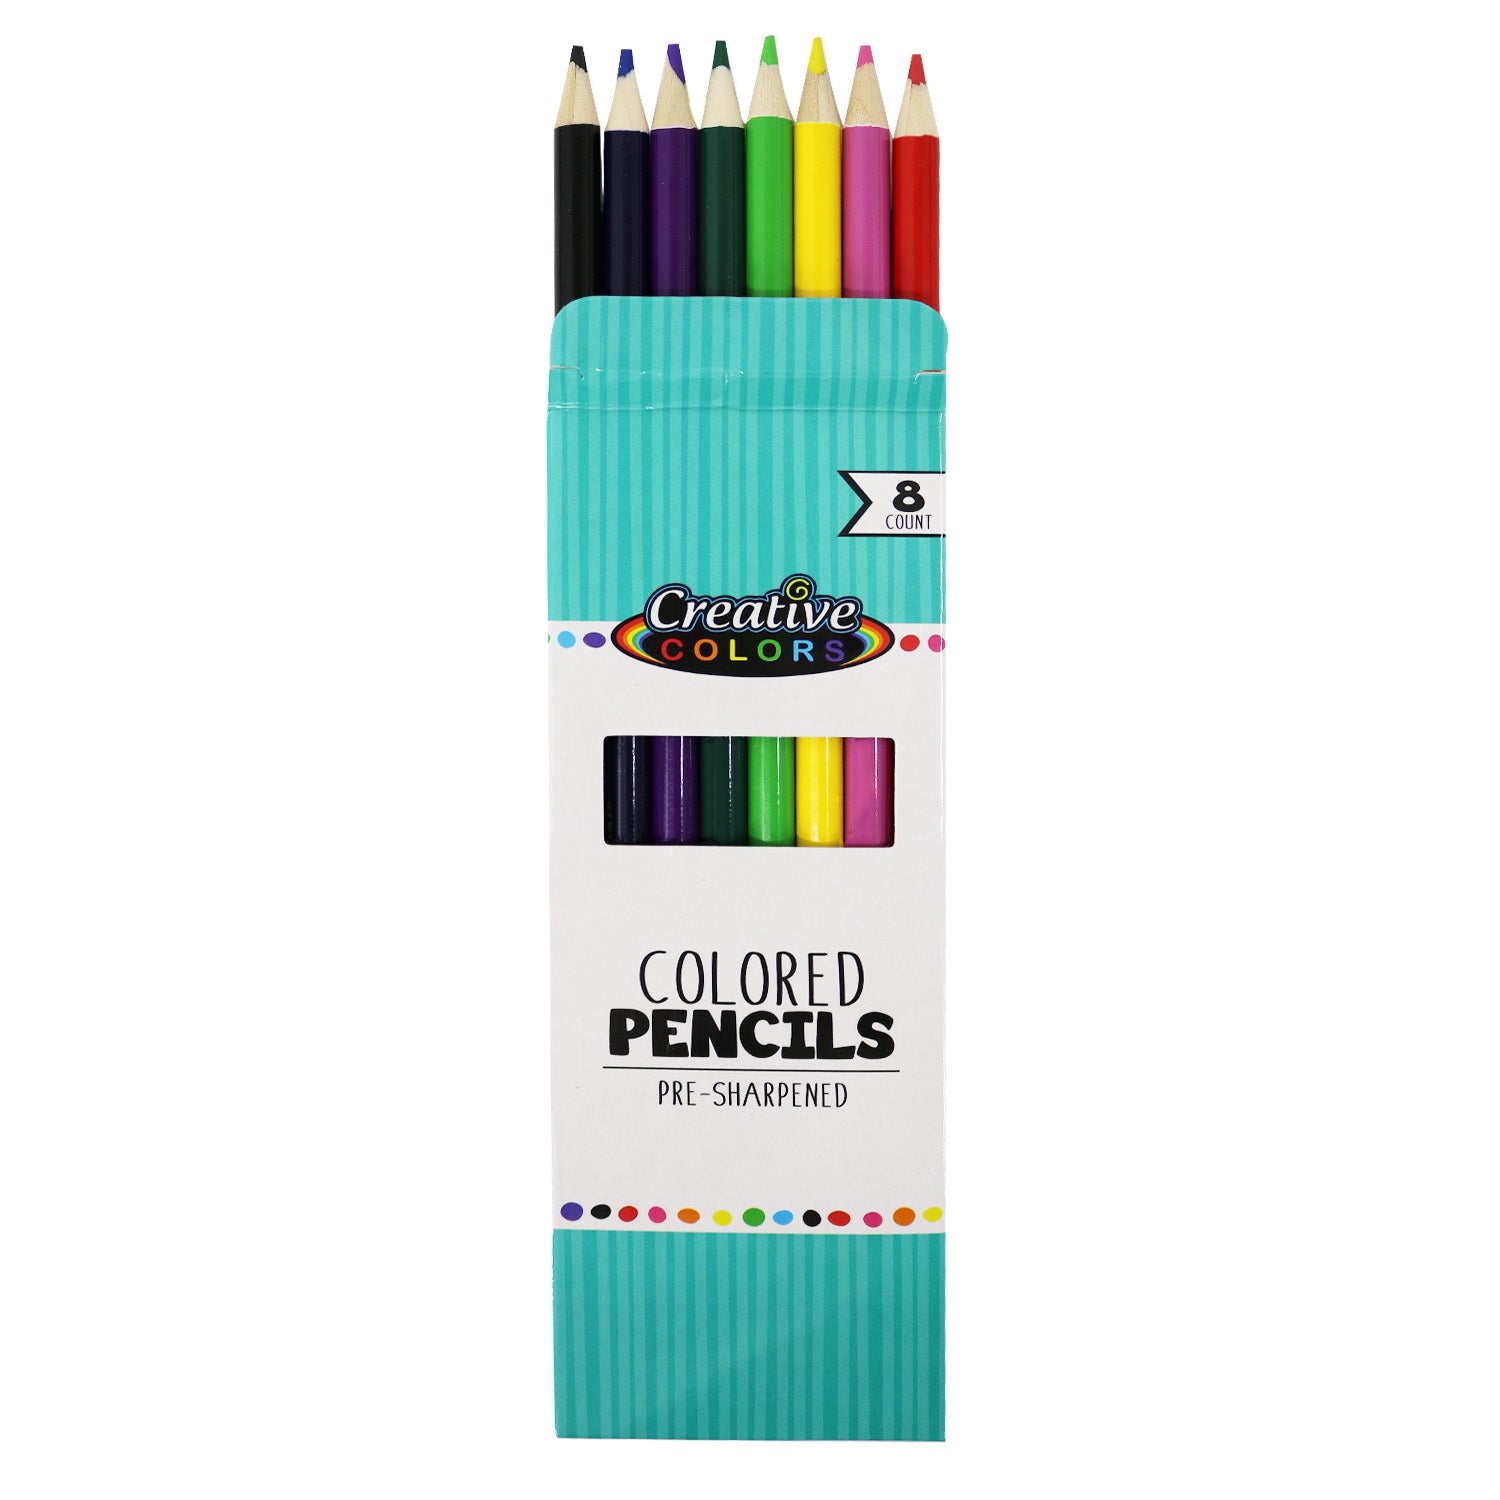 Wholesale Crayon Packs of Eight - 192 Packs per Case